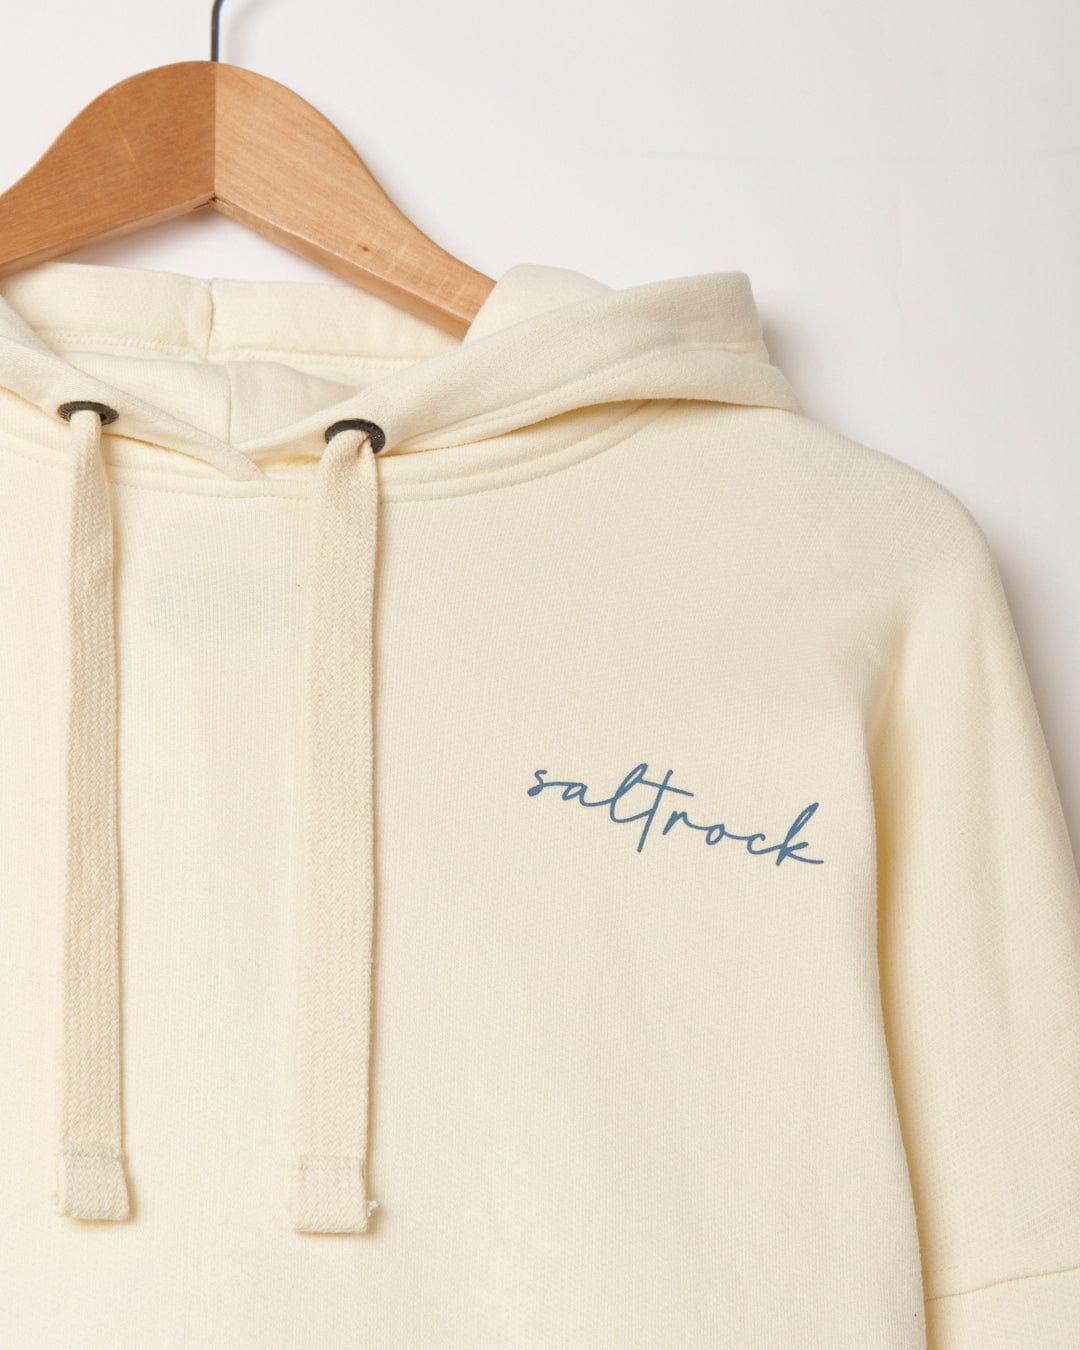 Poster - Womens Pop Hoodie - Cream with Saltrock branding in cursive logo embroidery hanging on a wooden hanger against a white background.